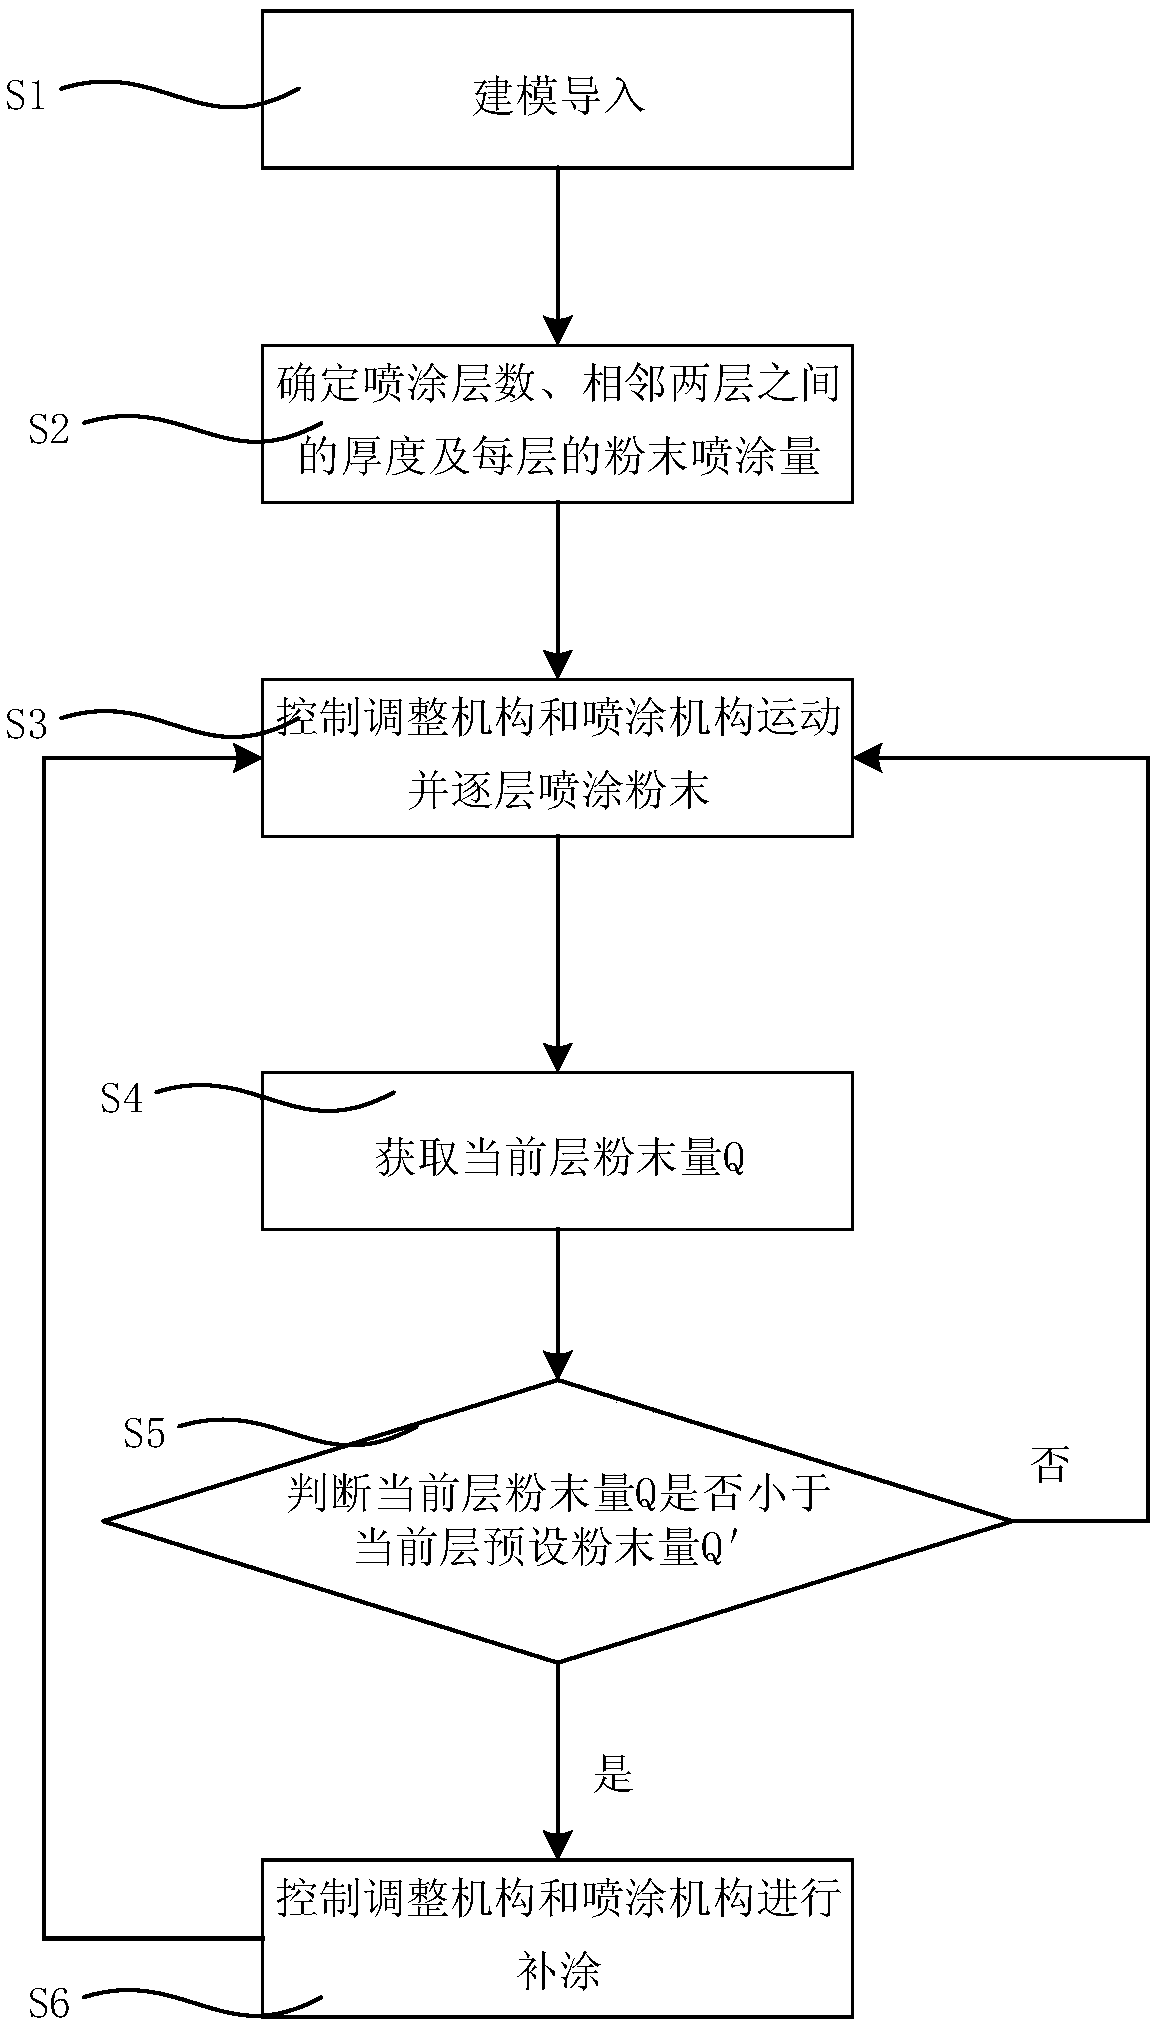 Cold spraying system and method